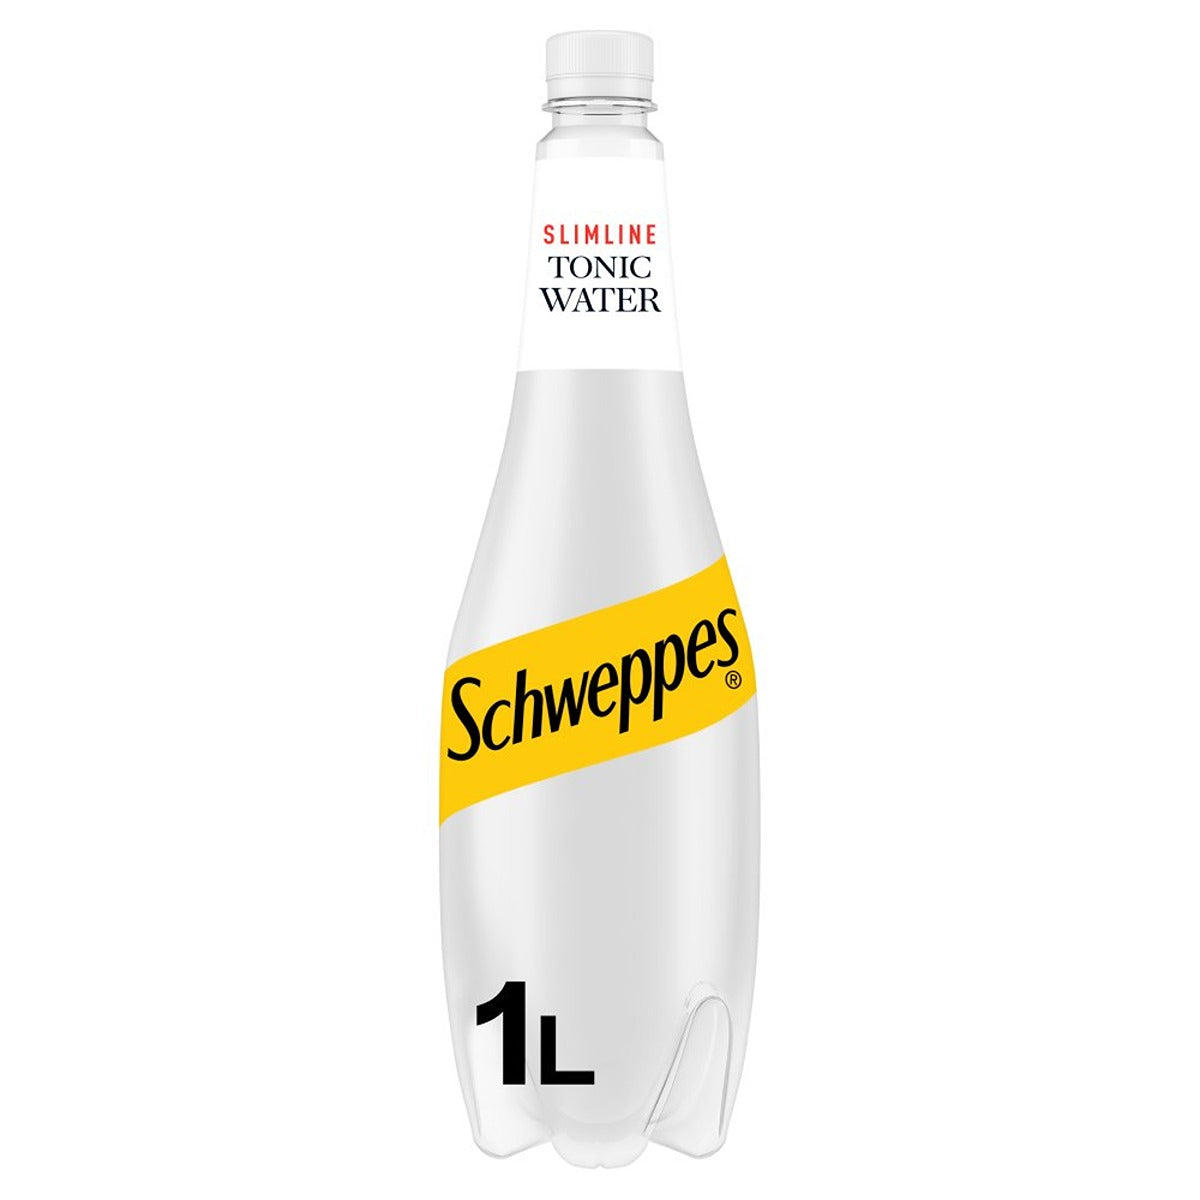 Schweppes - Slimline Tonic Water - 1L - Continental Food Store